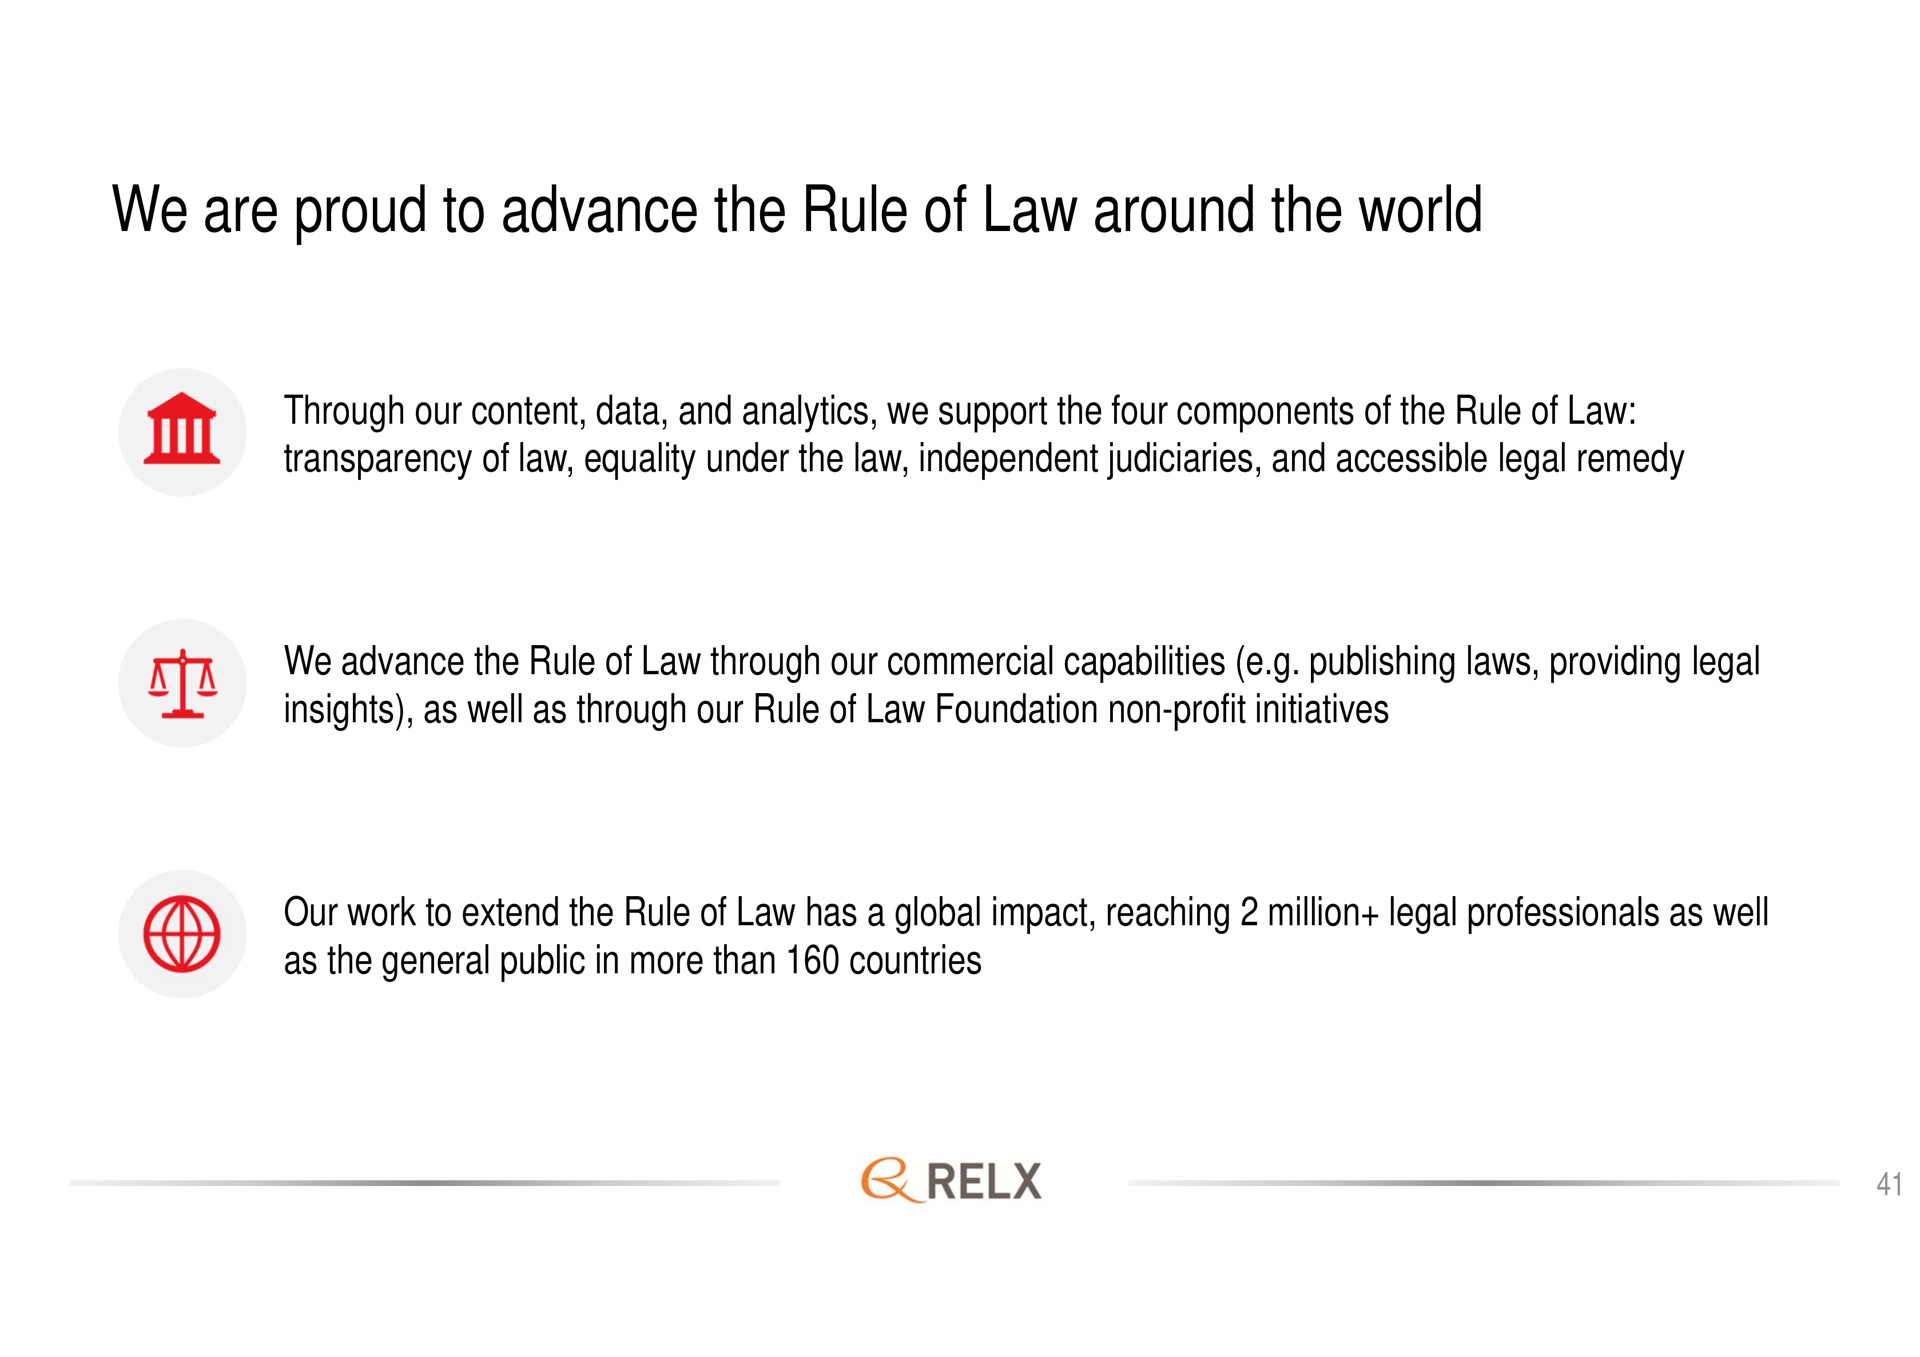 we are to advance the rule of law around the world | RELX